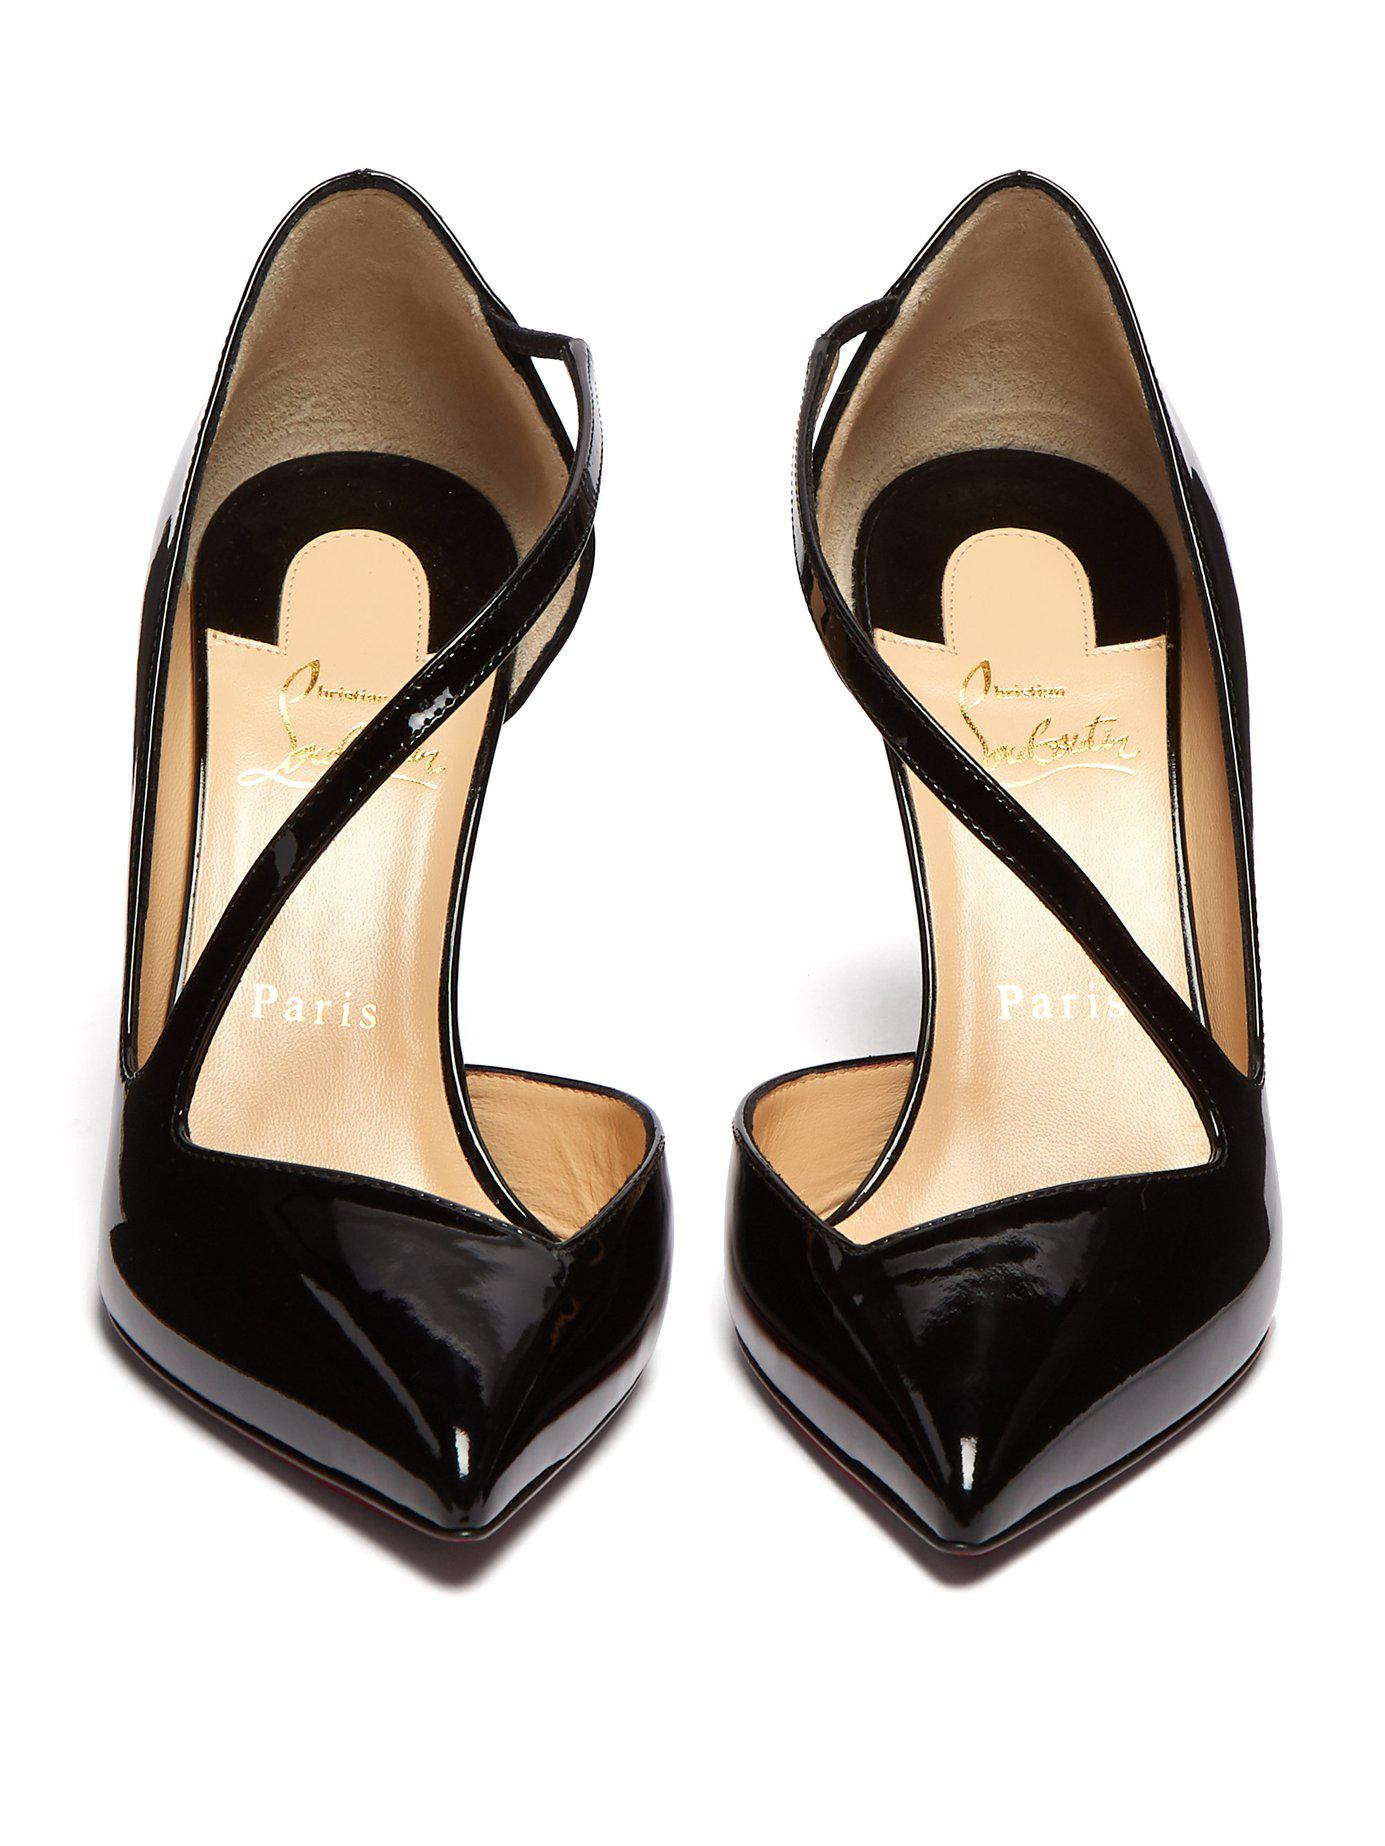 Christian Louboutin Jumping 85 Patent Leather Pumps in Black